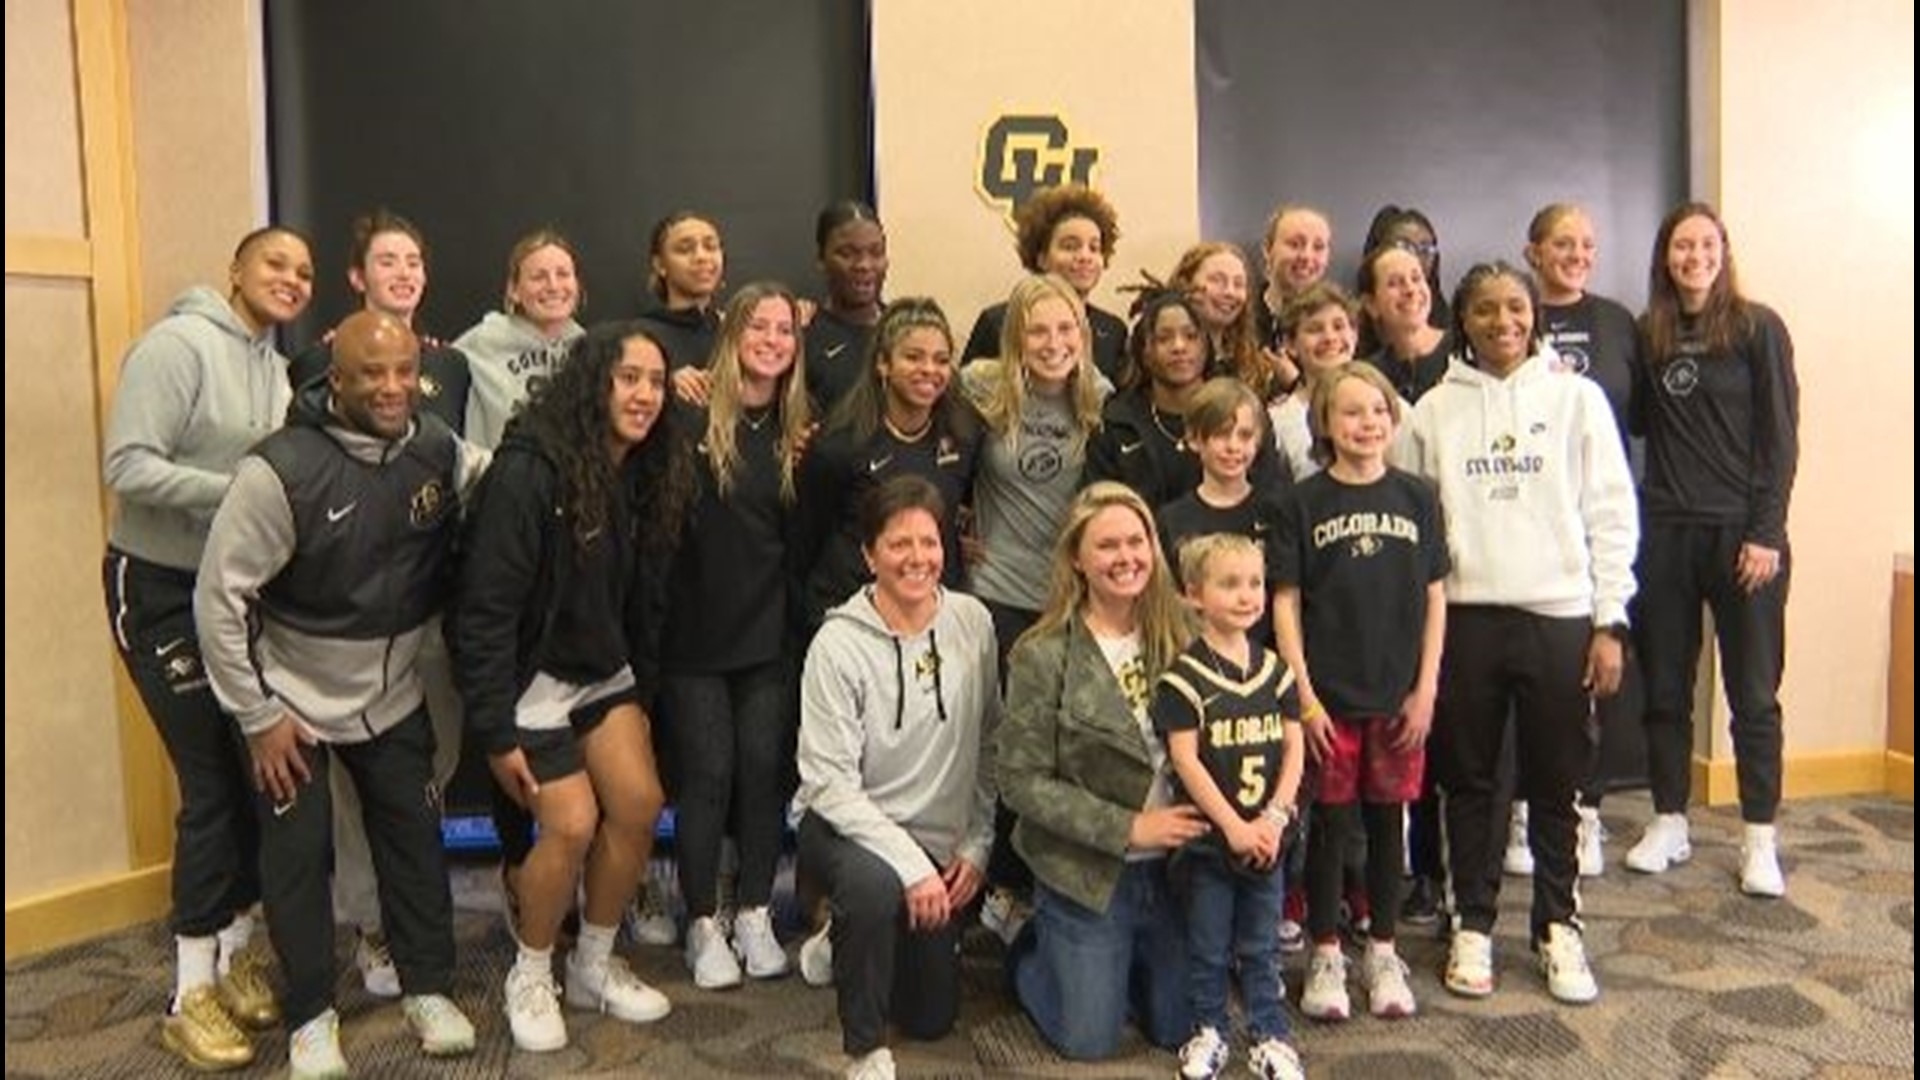 Colorado women's basketball partnered with Team IMPACT to sign 6-year-old Bellamy as a late-season addition to the Buffs squad. Bellamy is fighting leukemia.